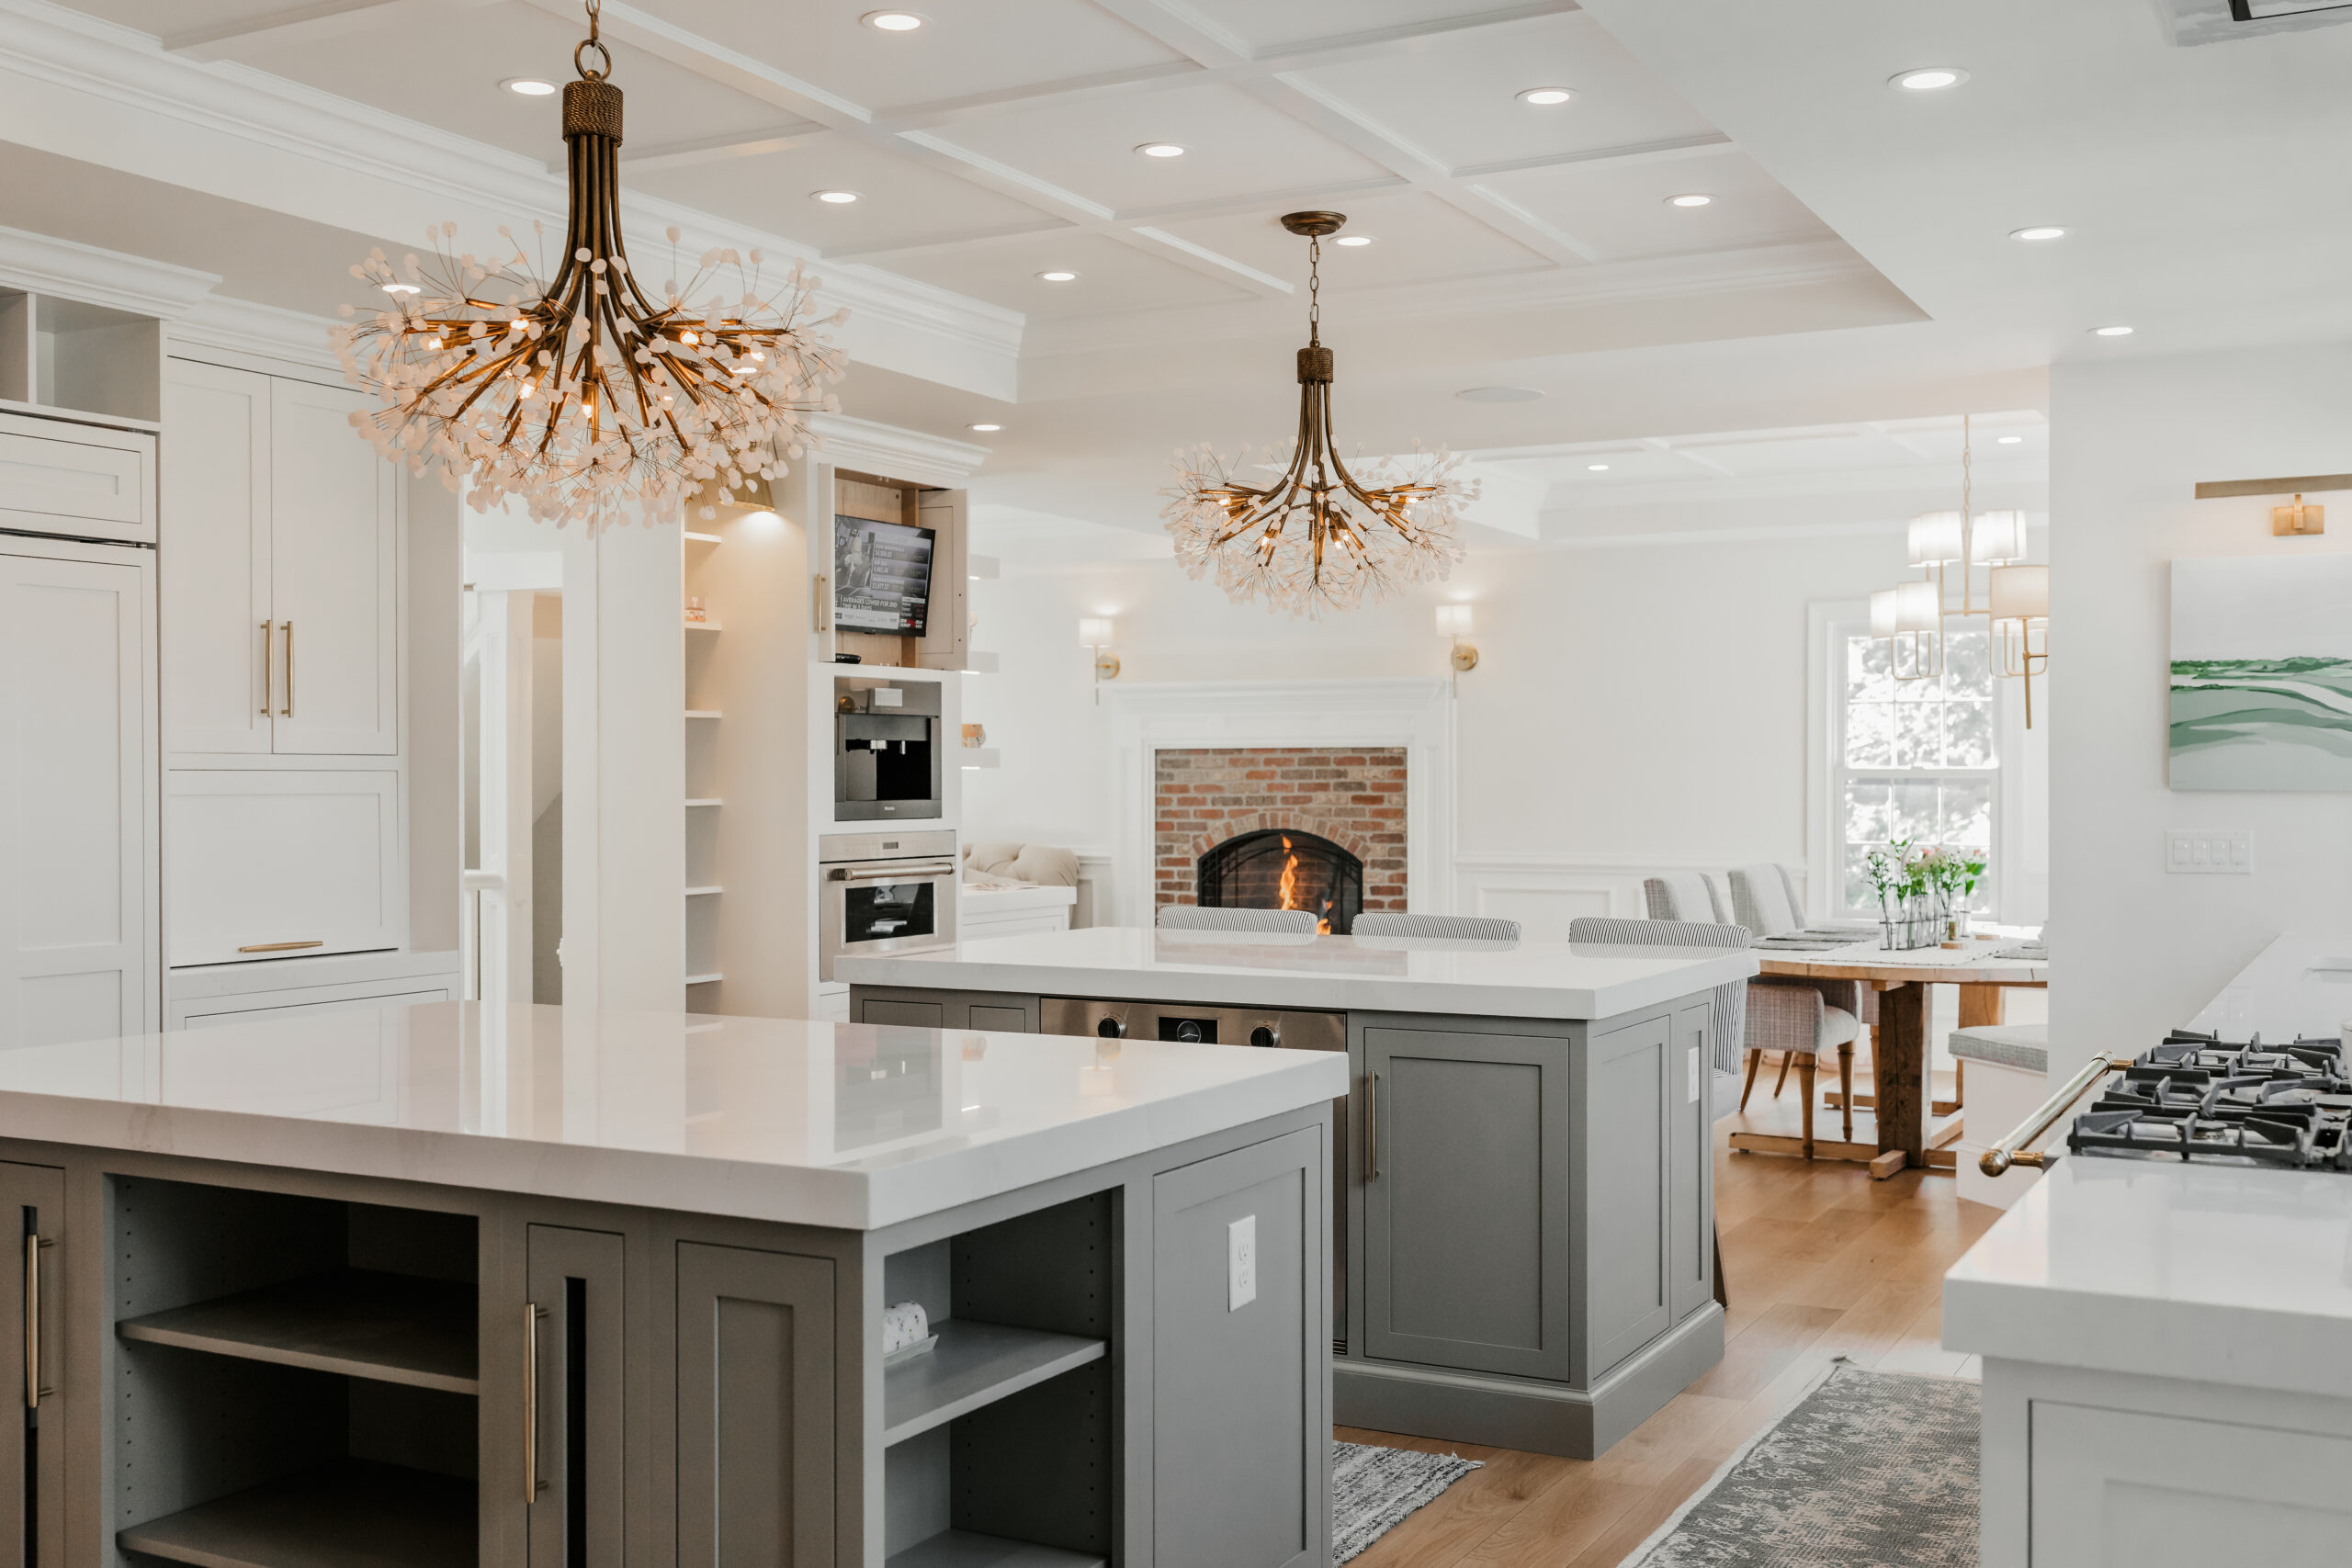 Multi room architectural design, kitchen cabinetry, architectural details, kitchen hardware, kitchen lighting, and interior design provided by Emily's Interiors